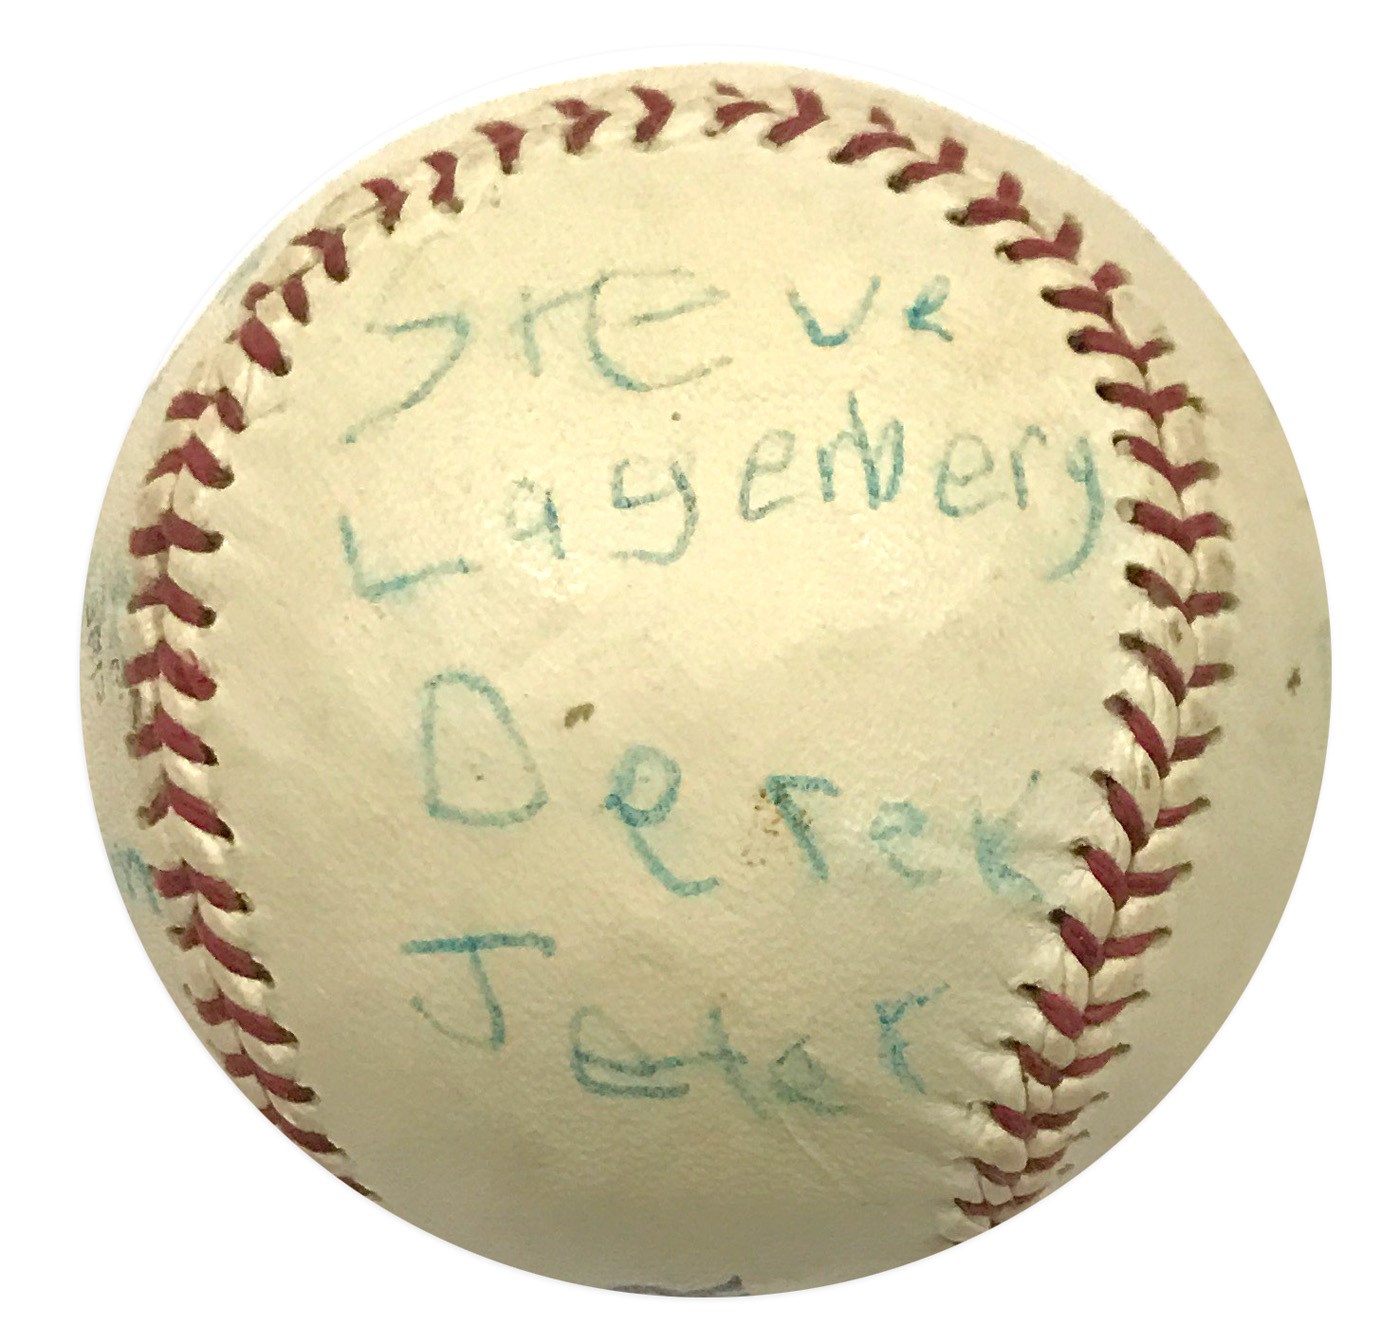 NY Yankees, Giants & Mets - 1982 Derek Jeter Signed Little League Baseball w/ Impeccable Provenance